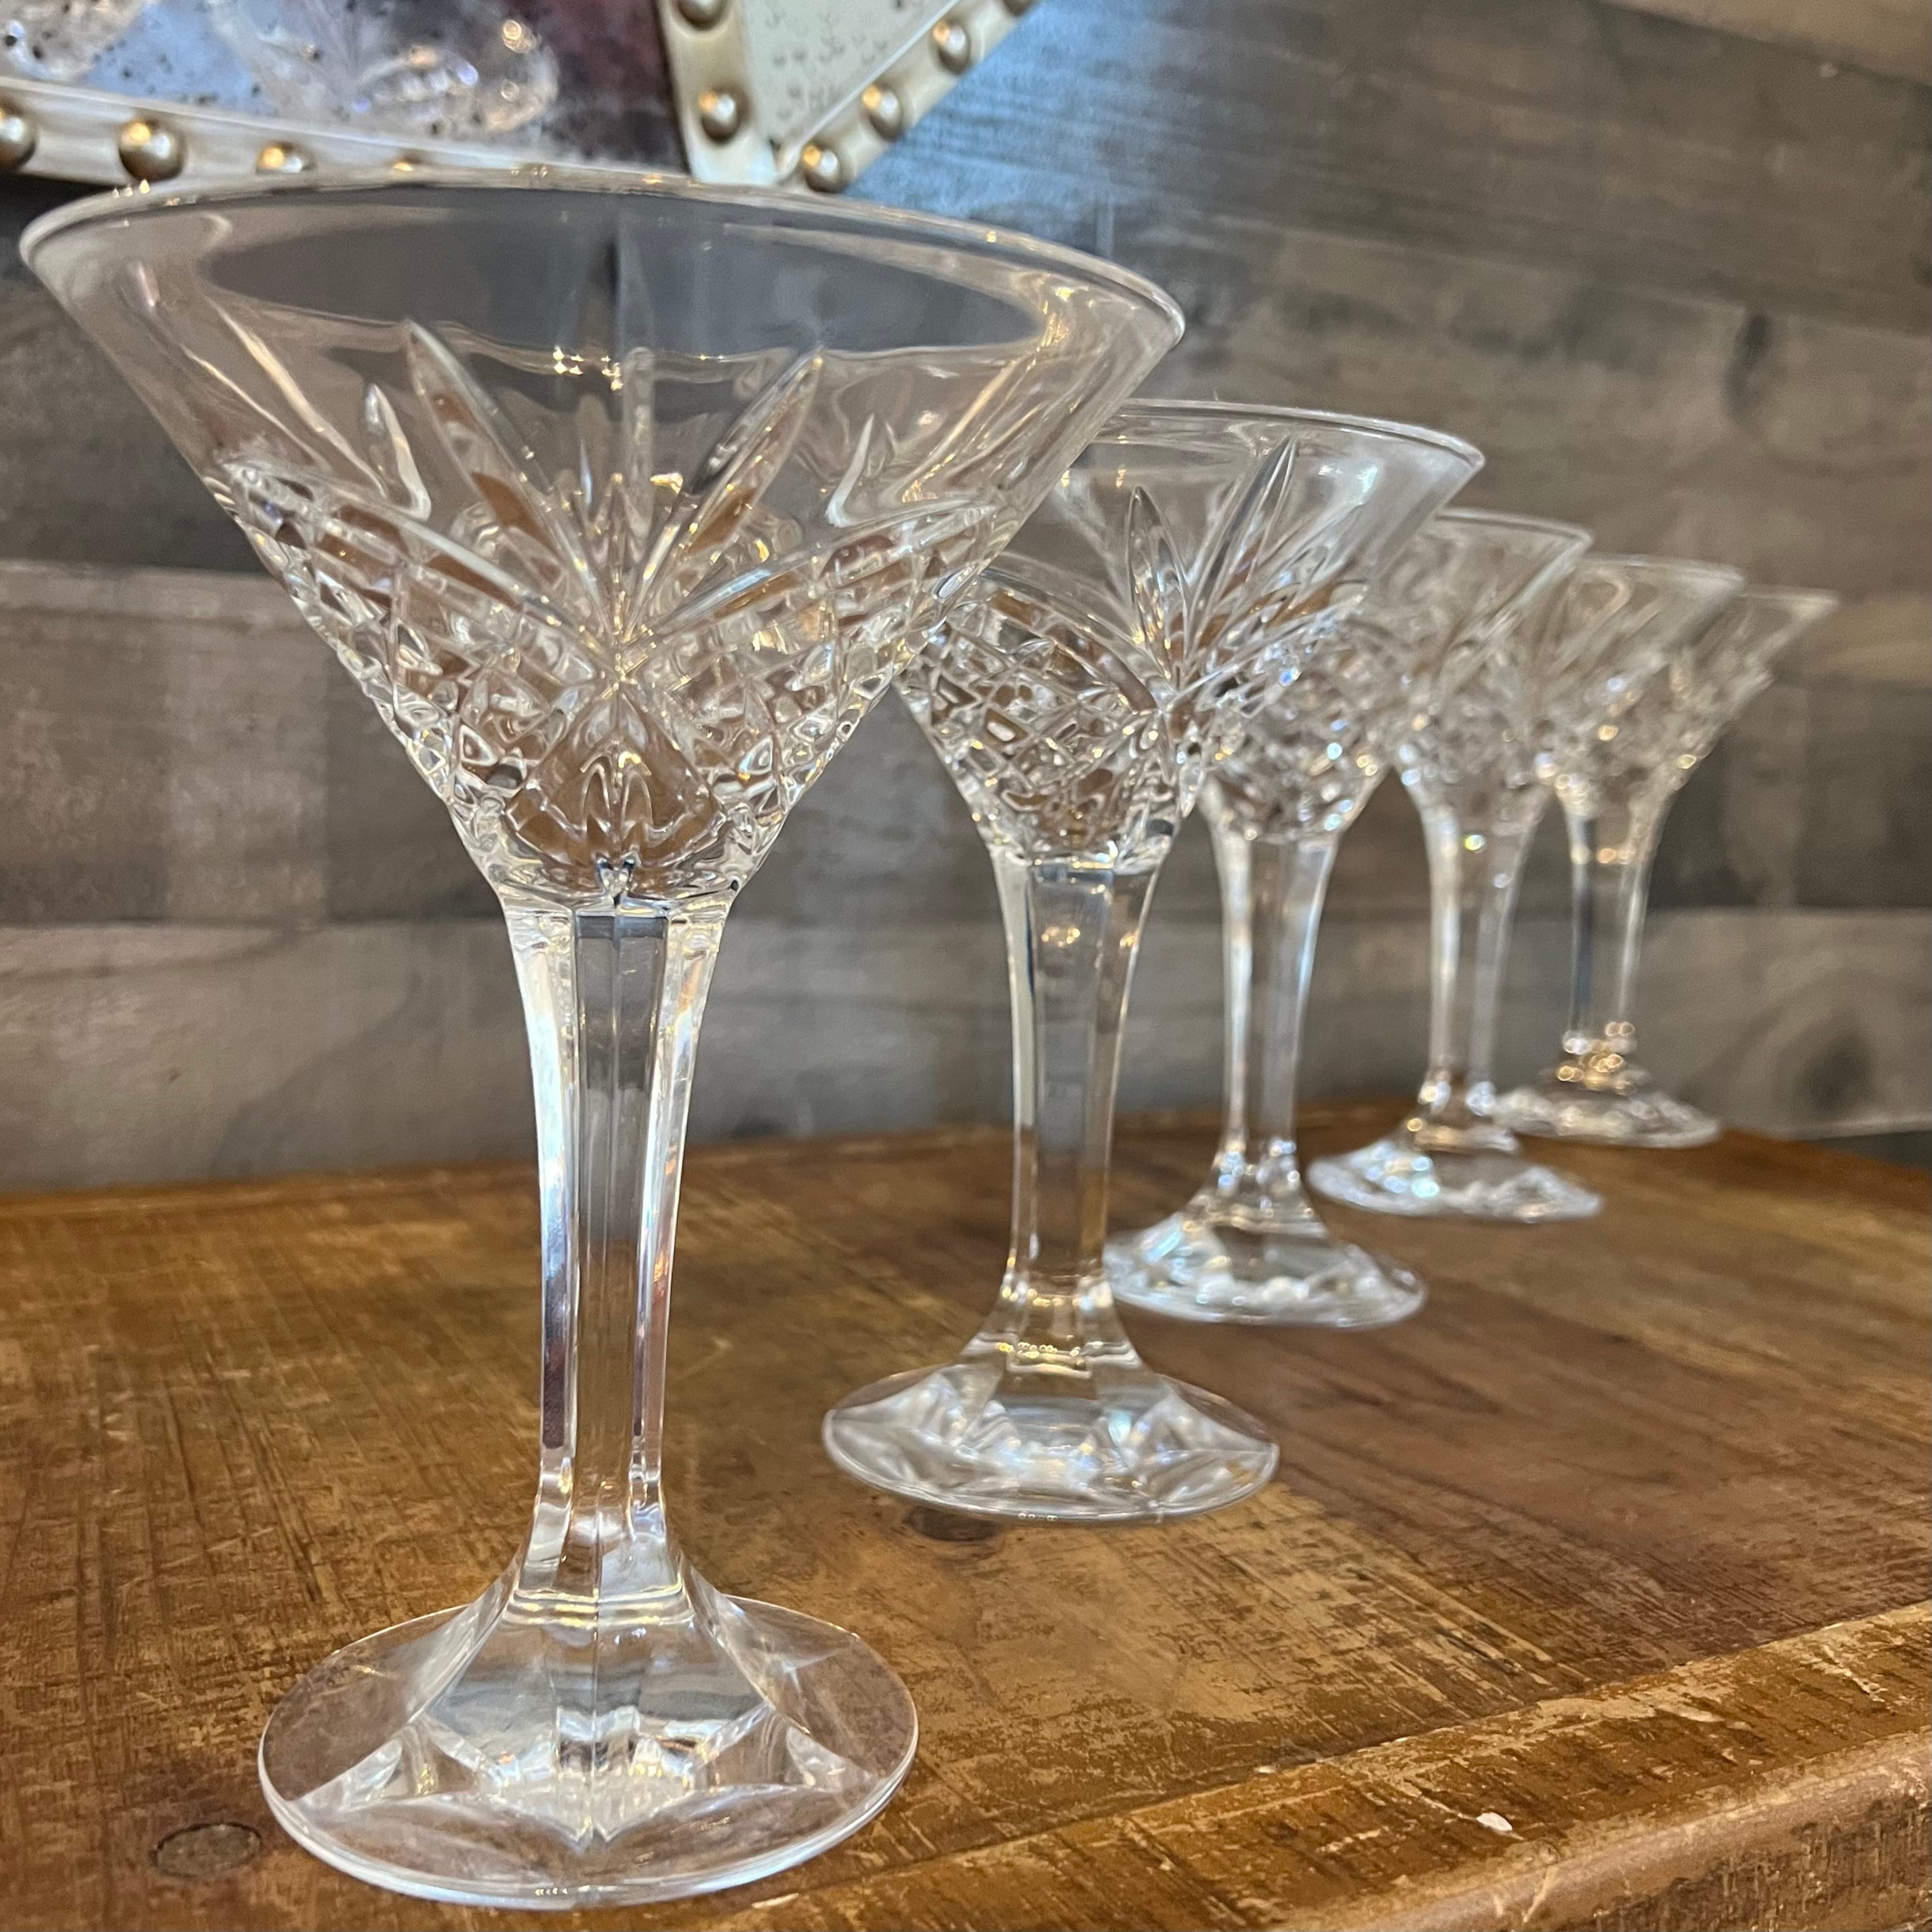 Godinger Bling Martini Glass and Matching Items & Matching Items